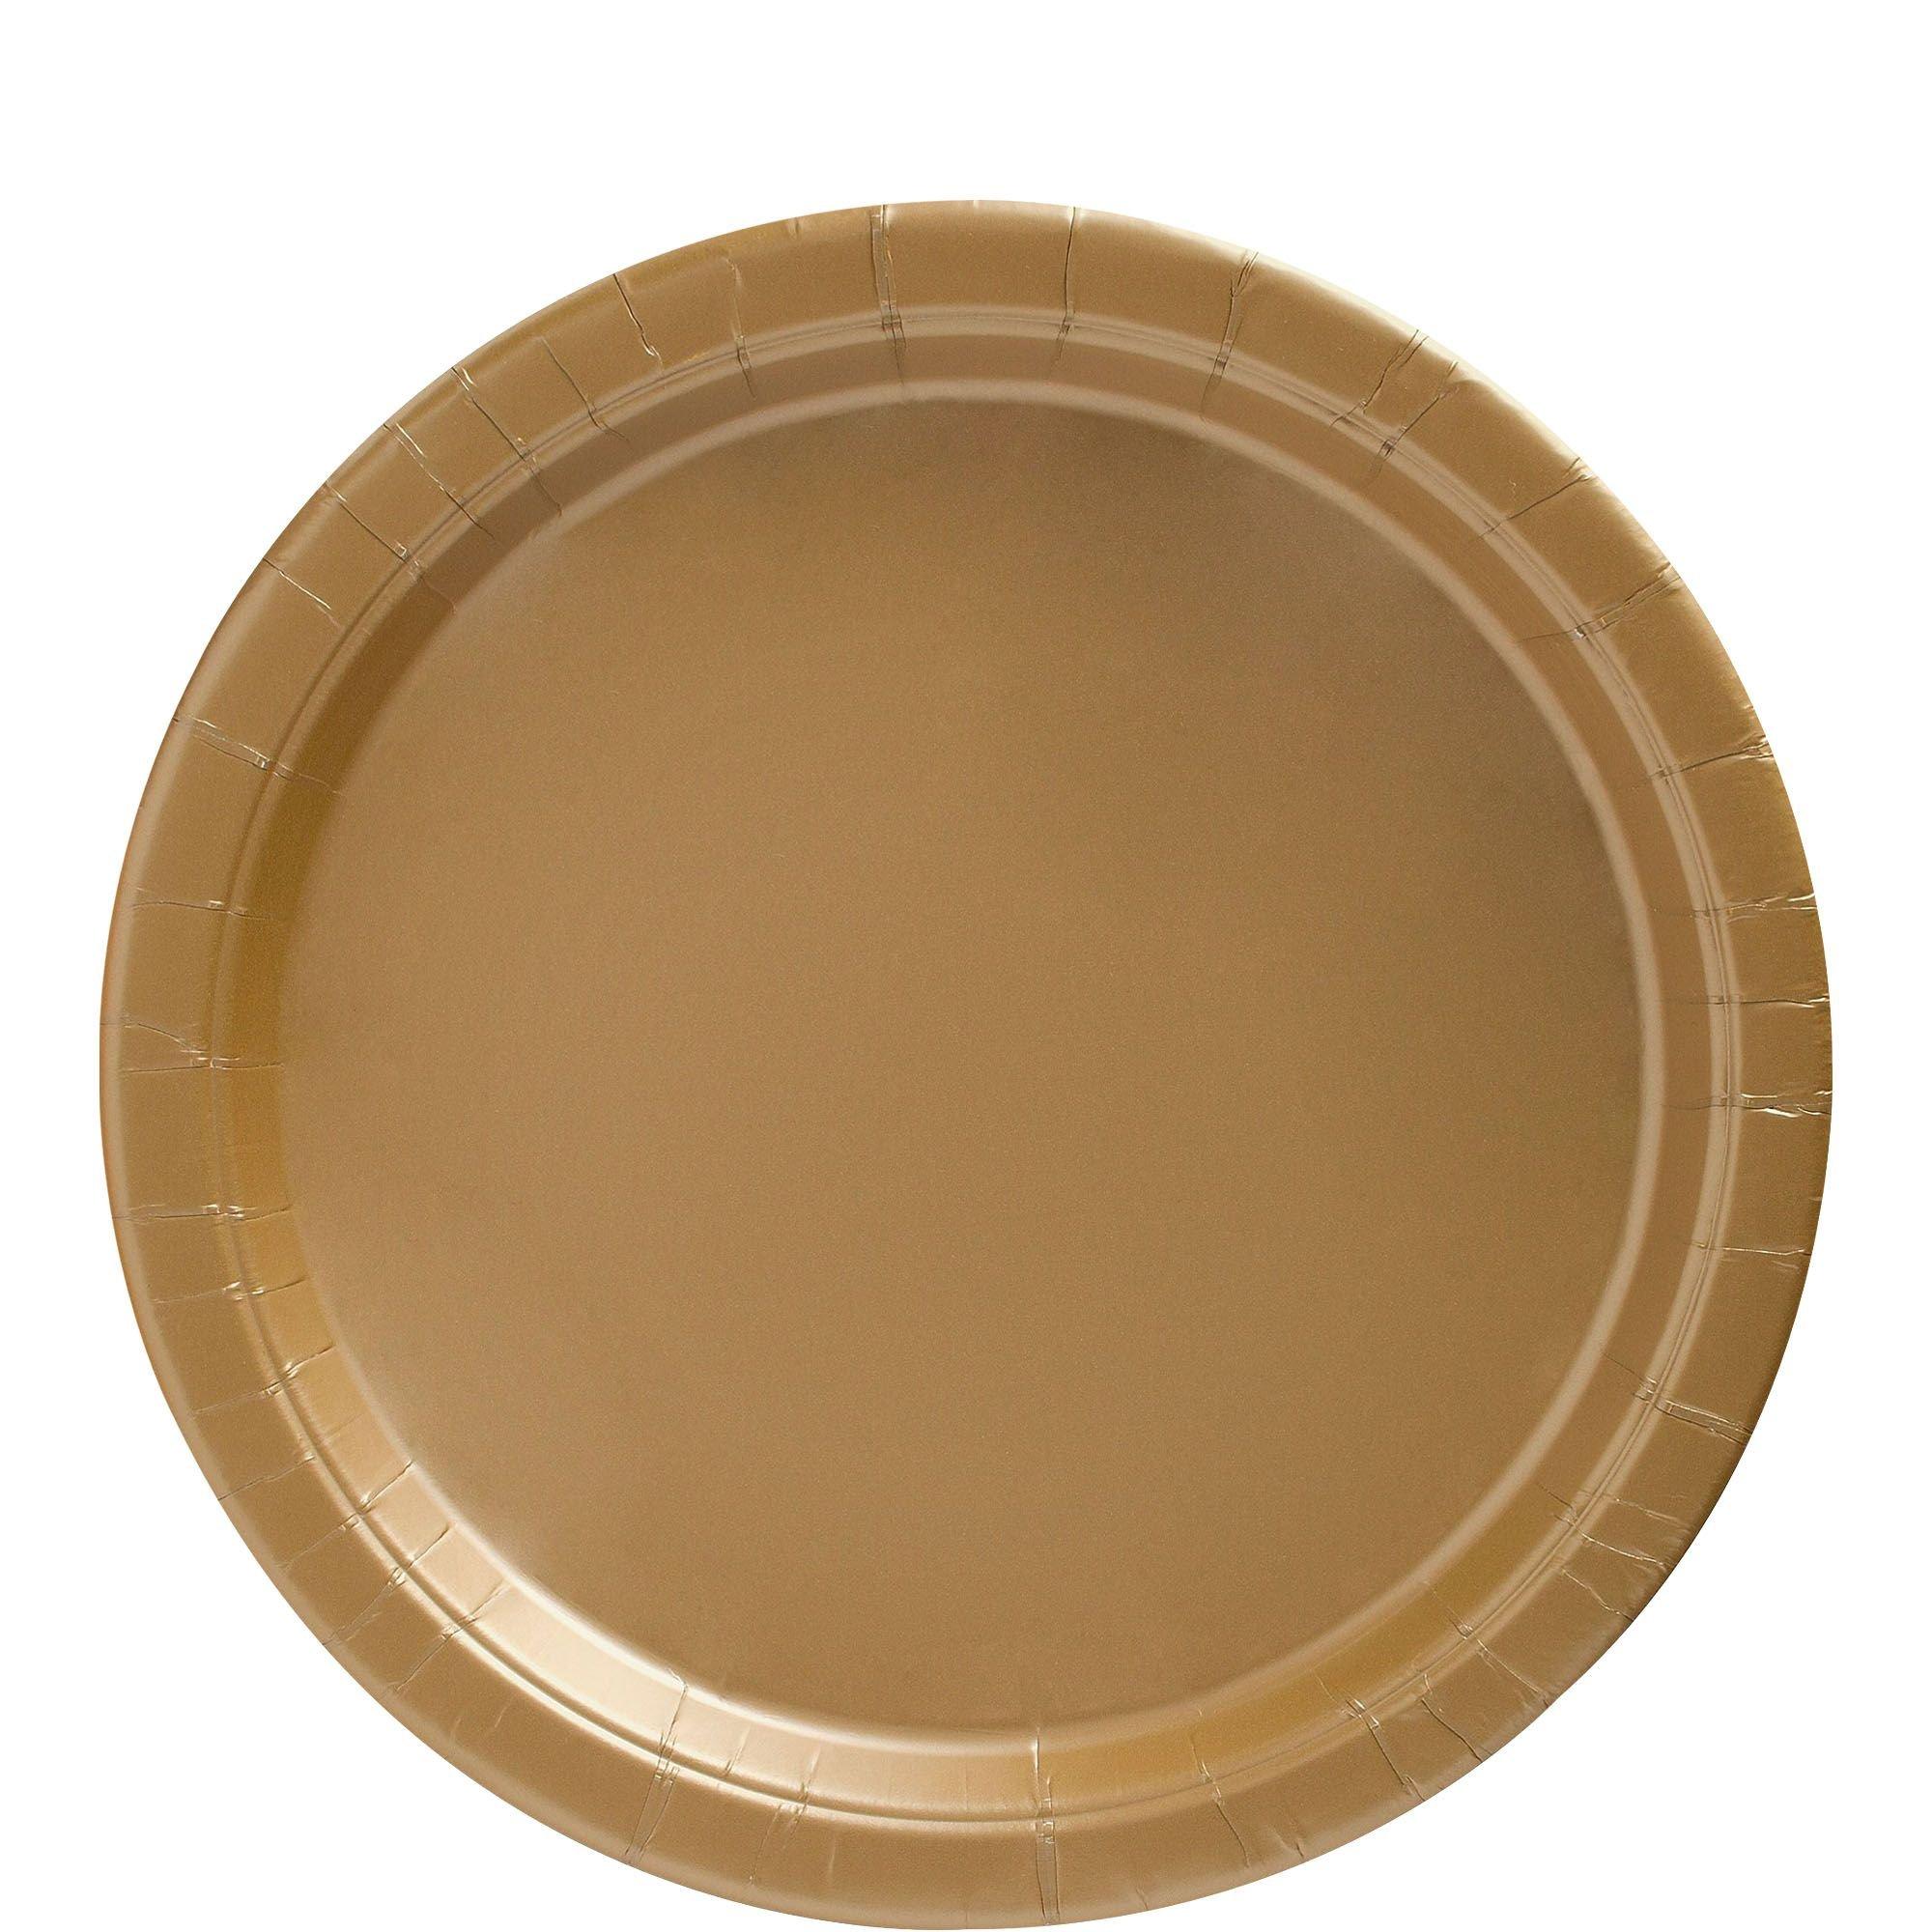 Extra Sturdy Round Paper Plates 10